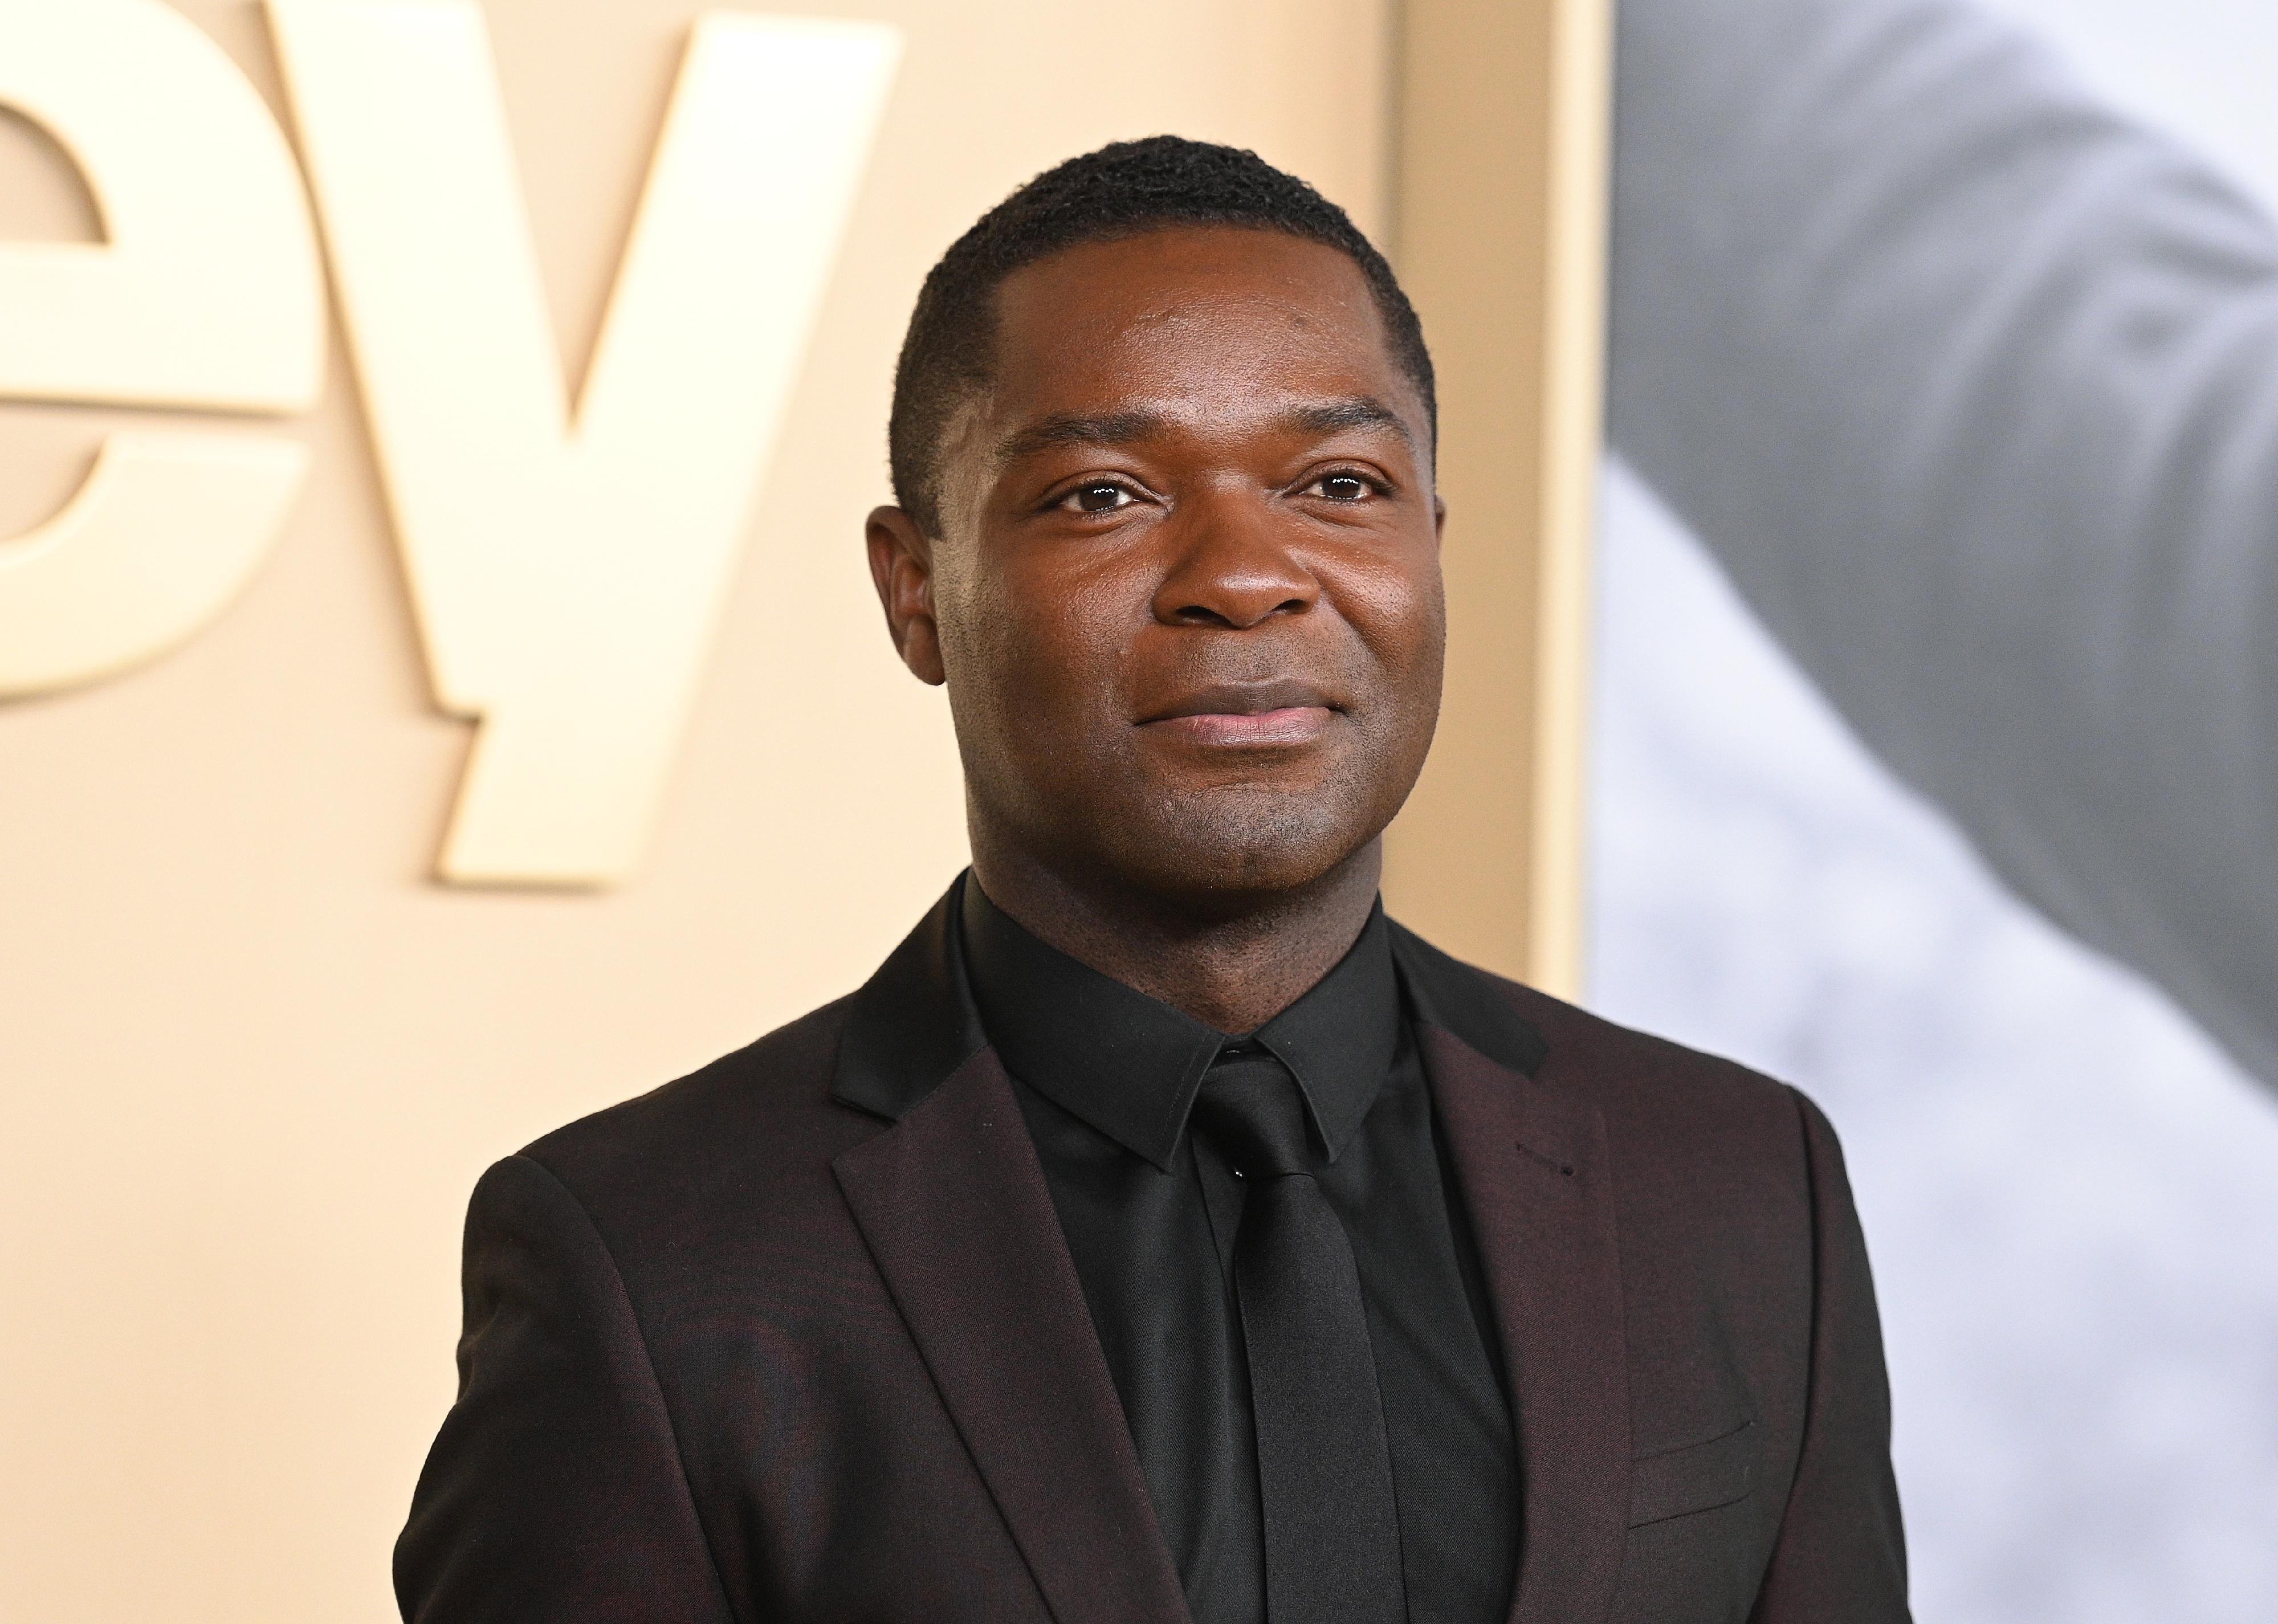 David Oyelowo at the premiere of "Sidney" held at the Academy Museum of Motion Pictures.